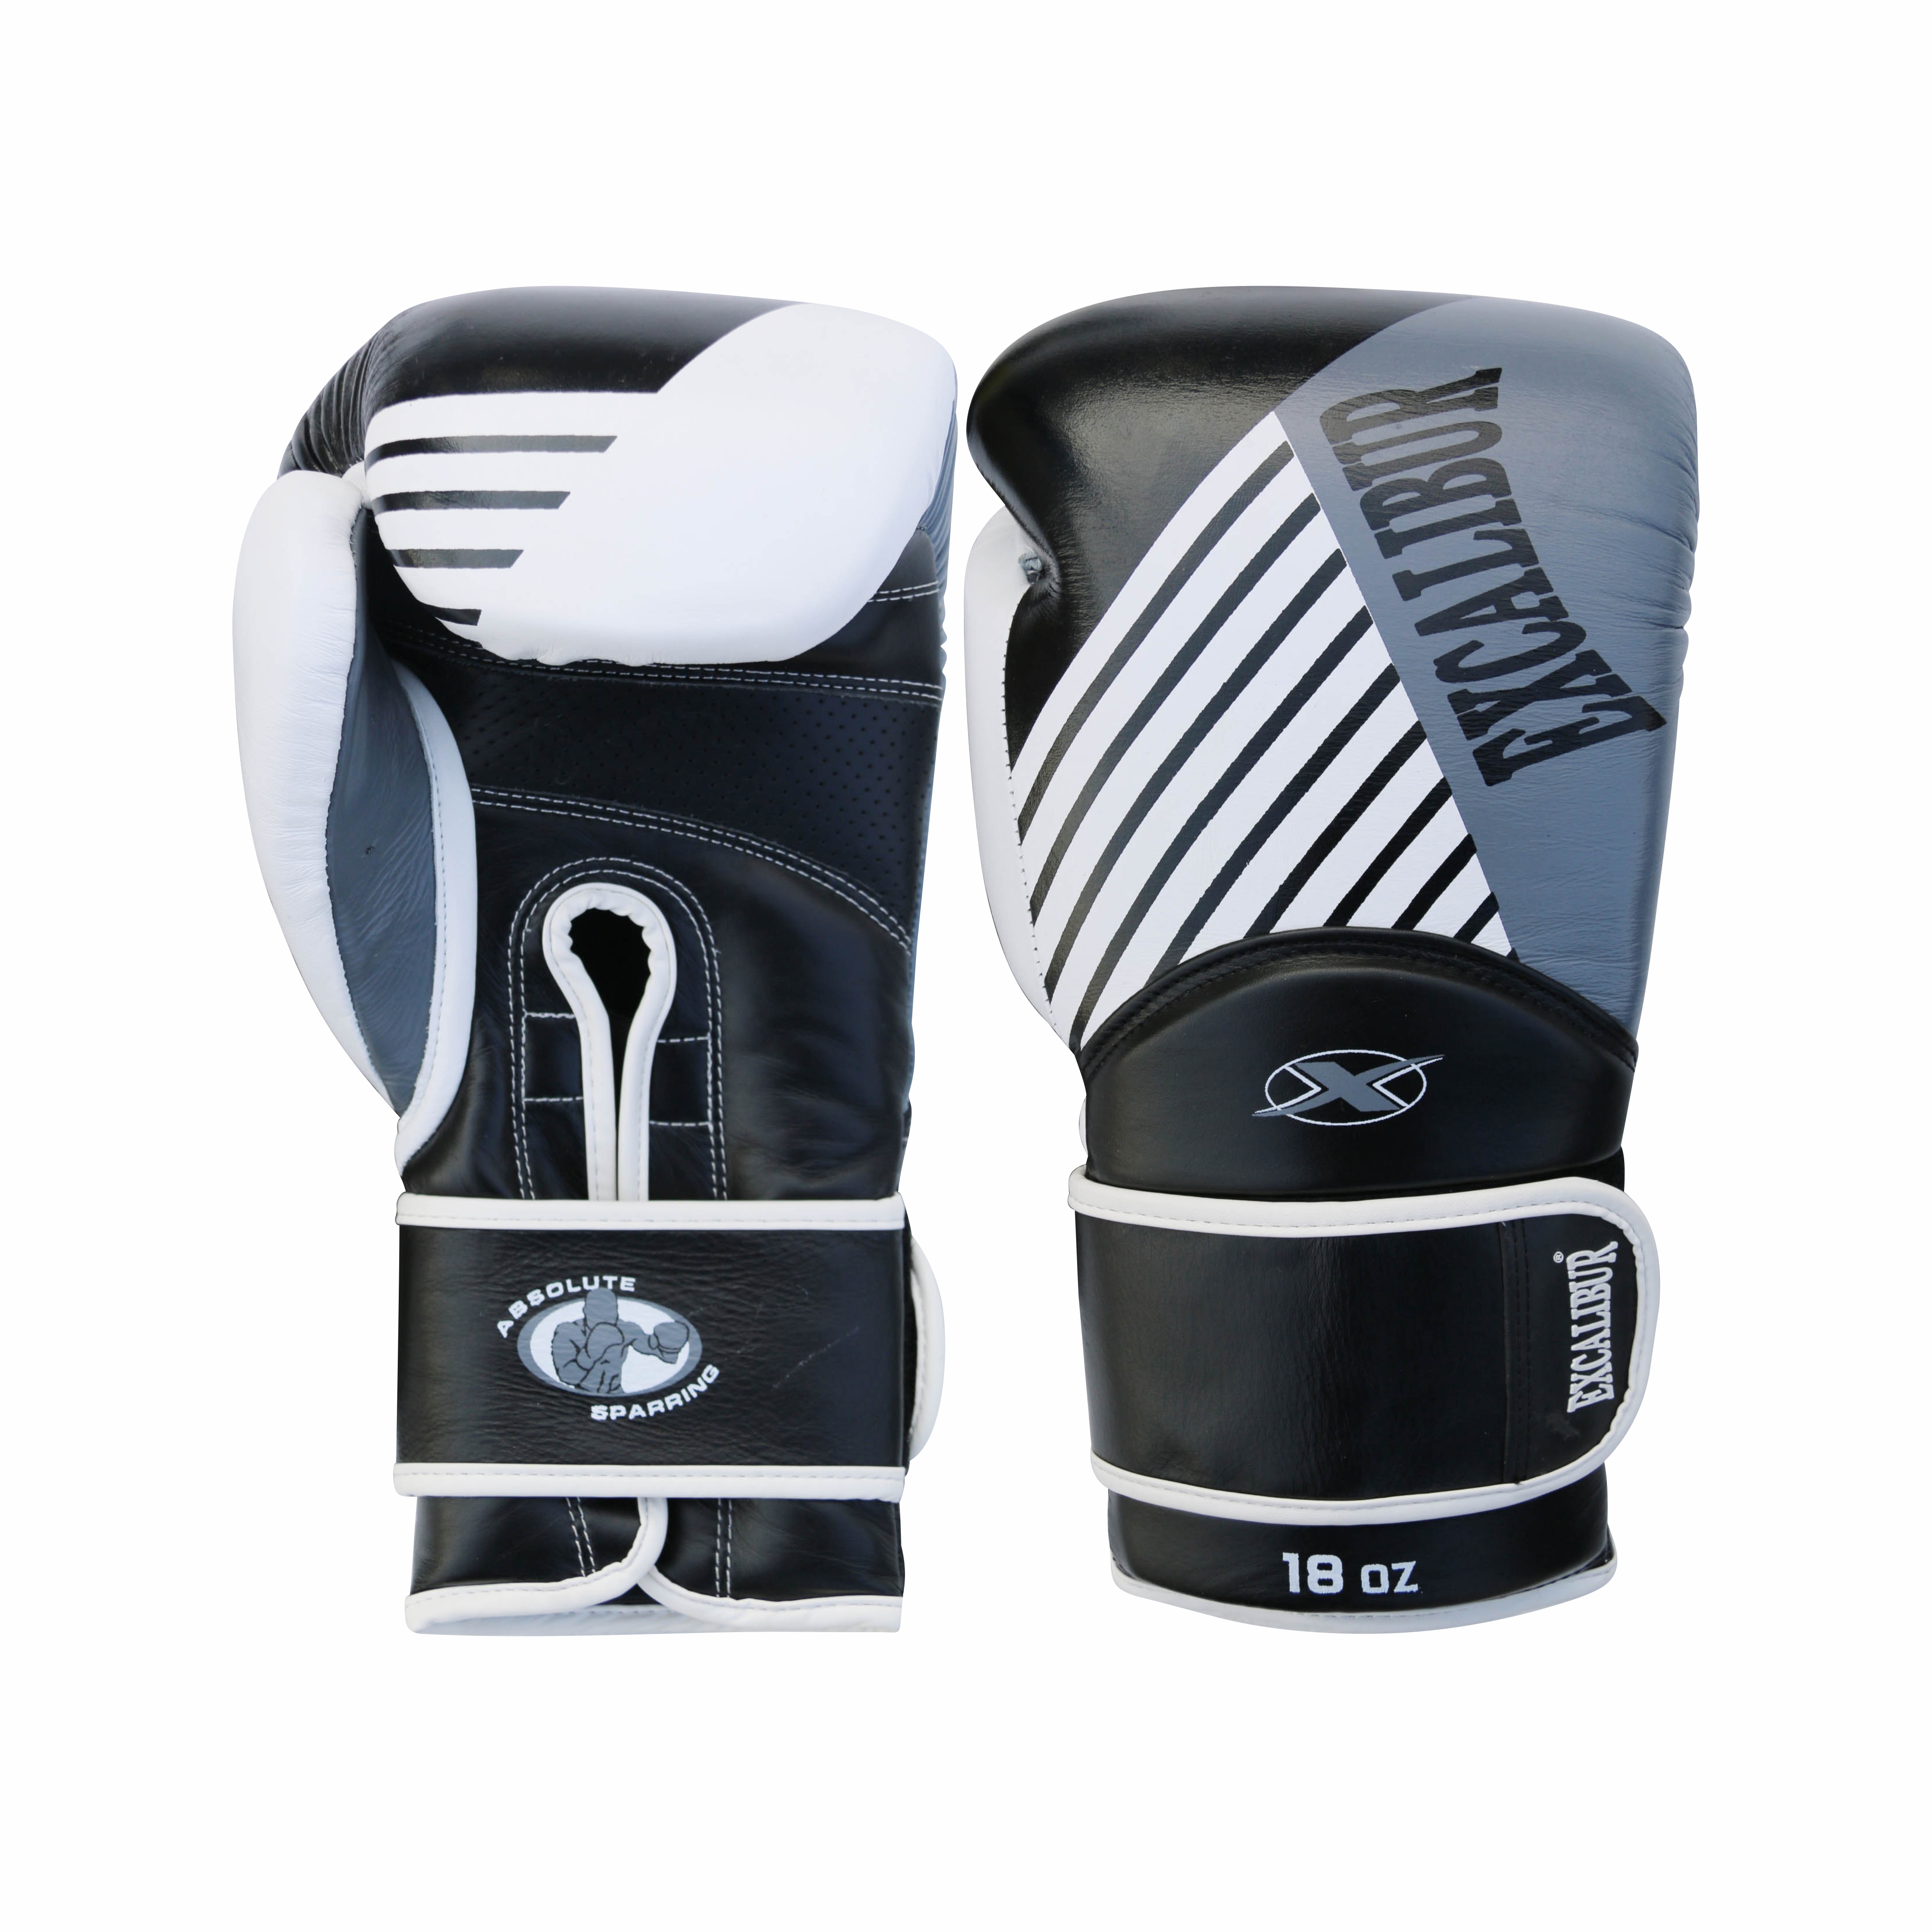 Absolute Sparring Boxing Gloves